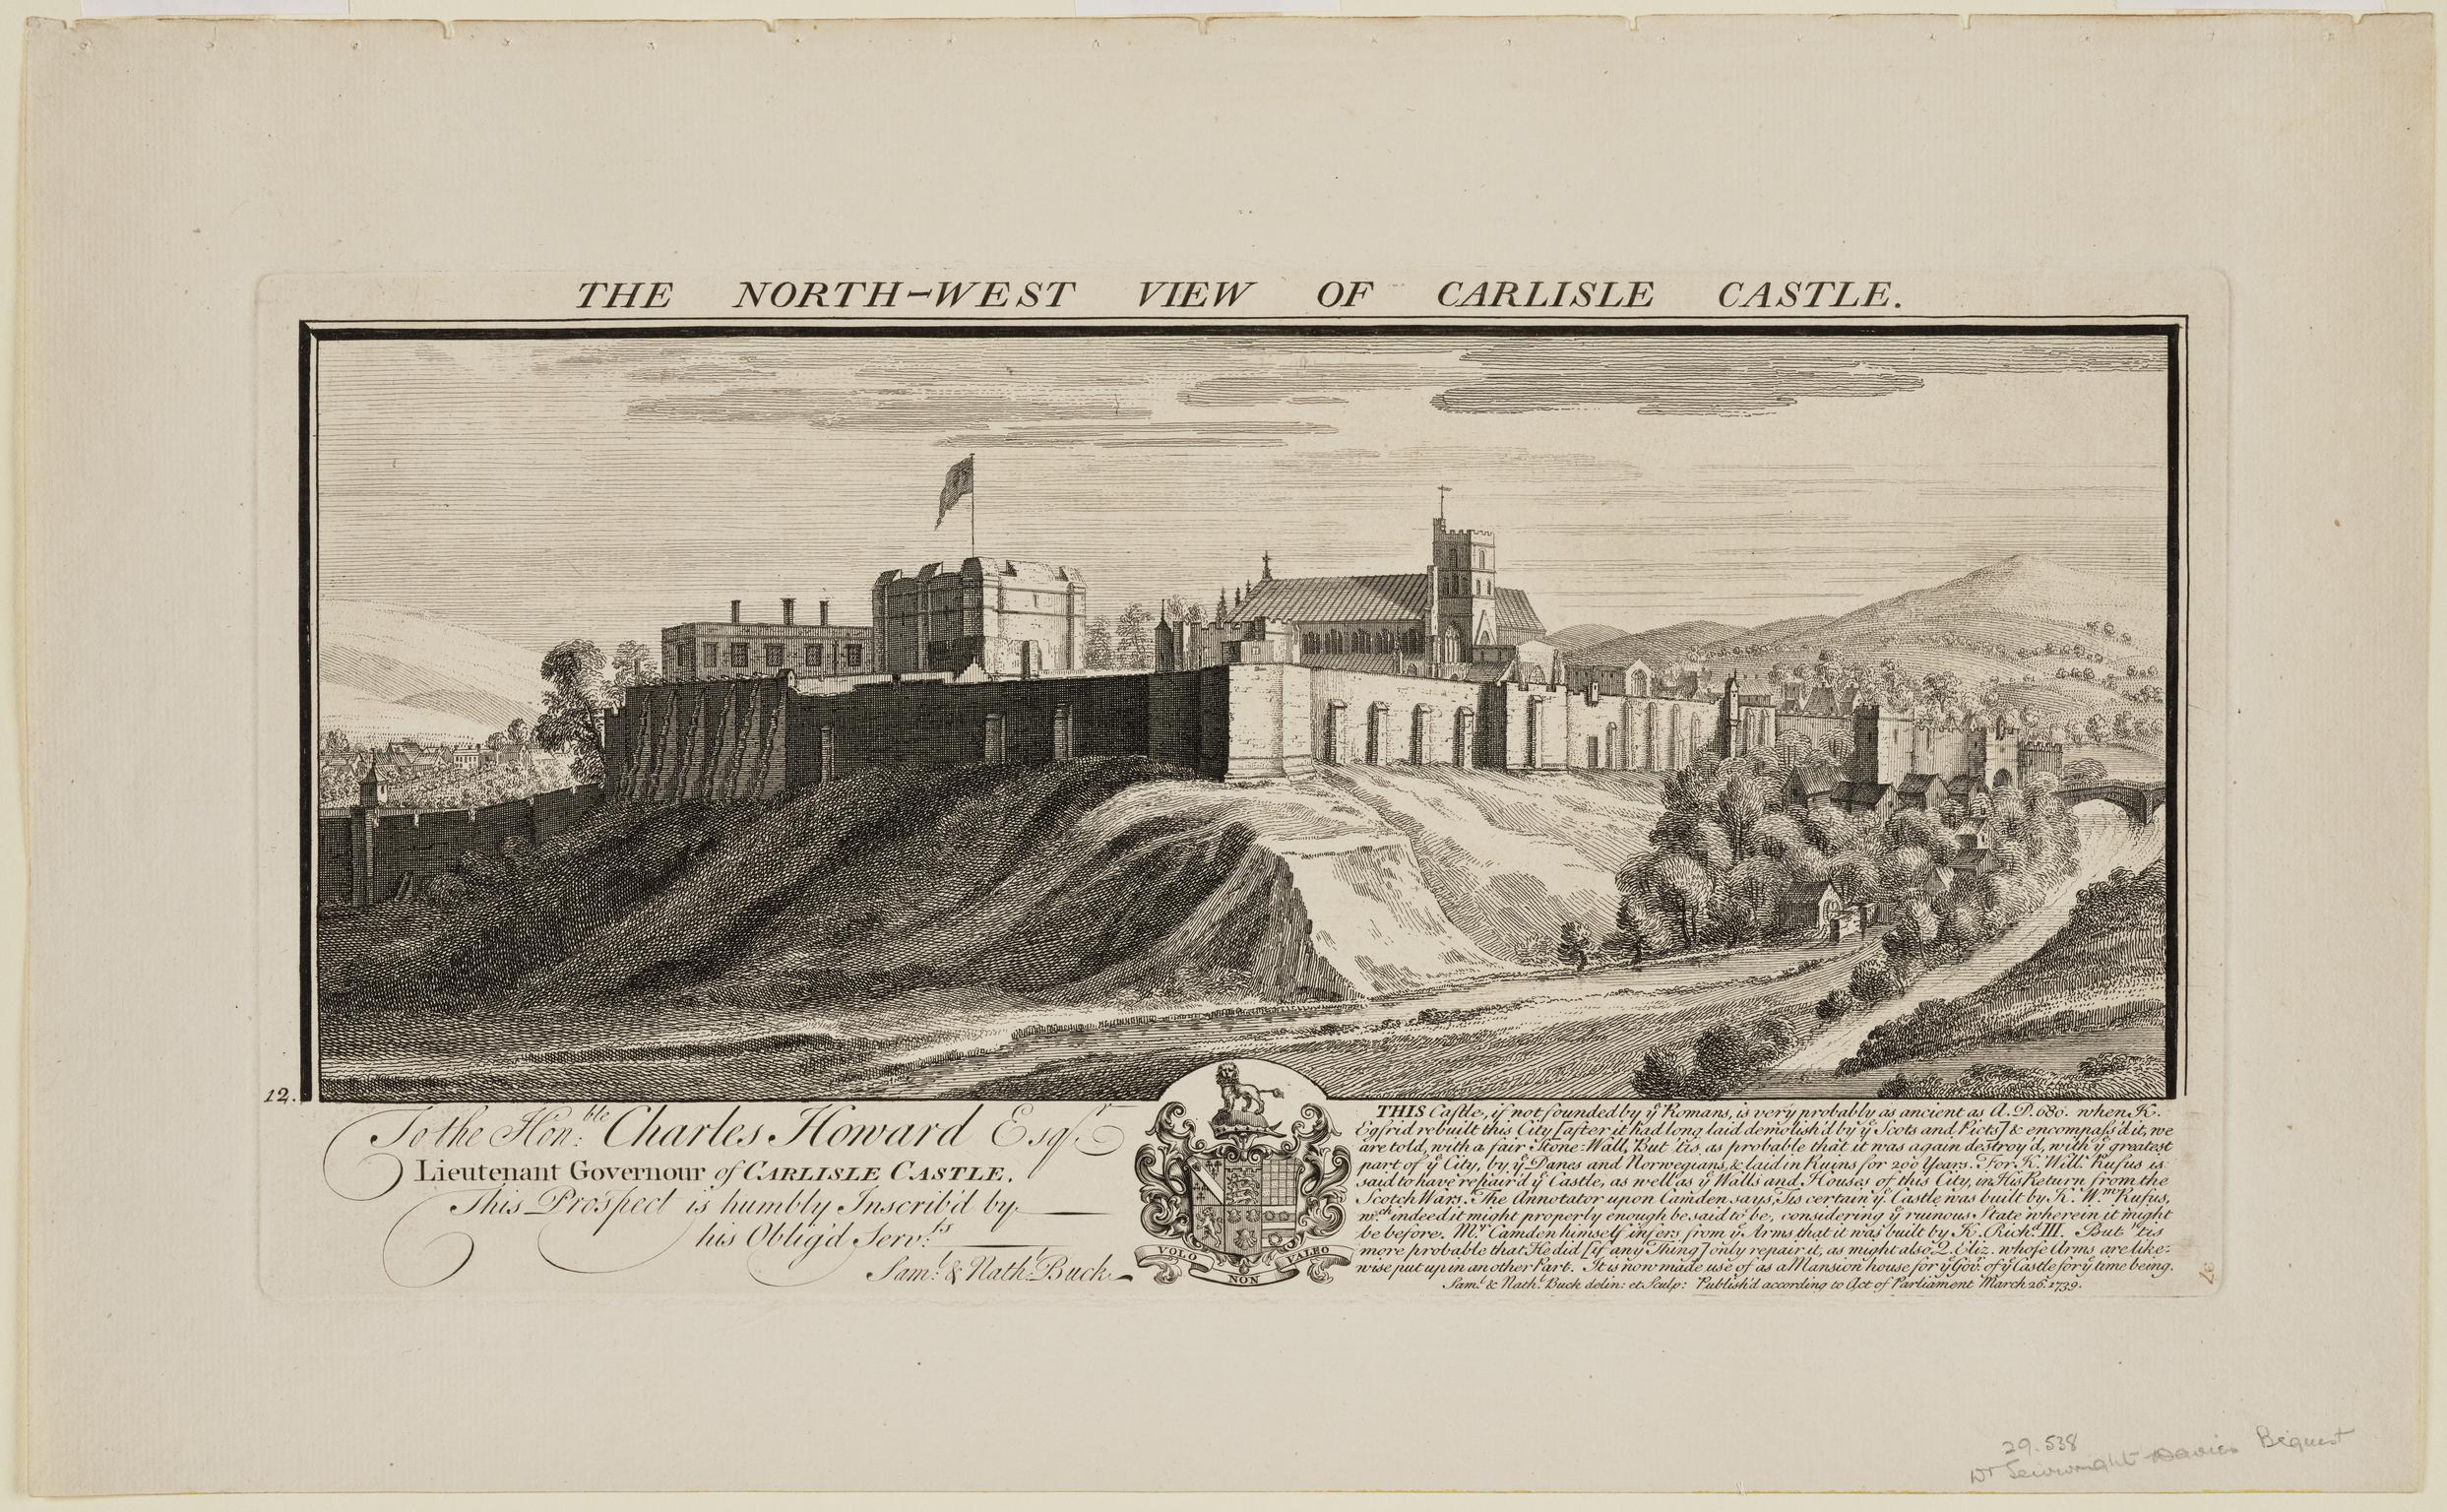 The North-West View of Carlisle Castle